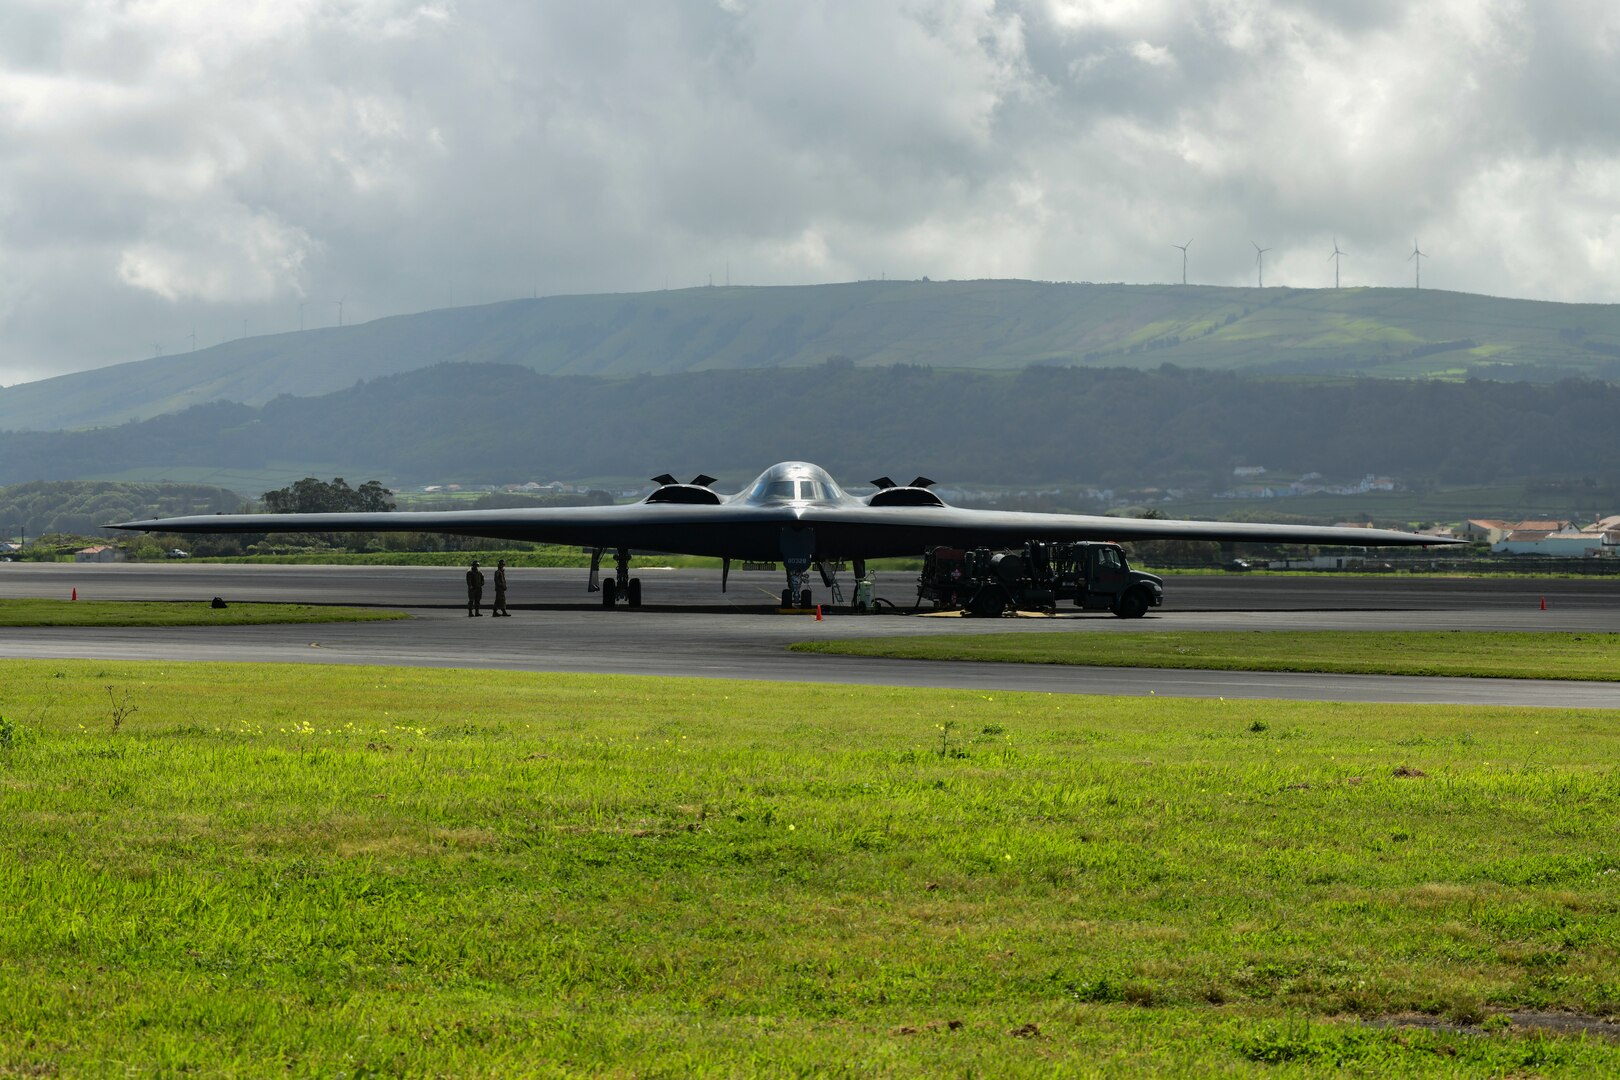 A B-2 Spirit, assigned to Whiteman Air Force Base, Missouri, hot-pit refuels at Lajes Field, Azores, March 19, 2021. The bomber supported a Bomber Task Force mission during which it integrated Norwegian F-35s in the High North. U.S. Global Strike Command Airmen and assets routinely operate across the globe and are flexible to respond to changes in the operational environment.